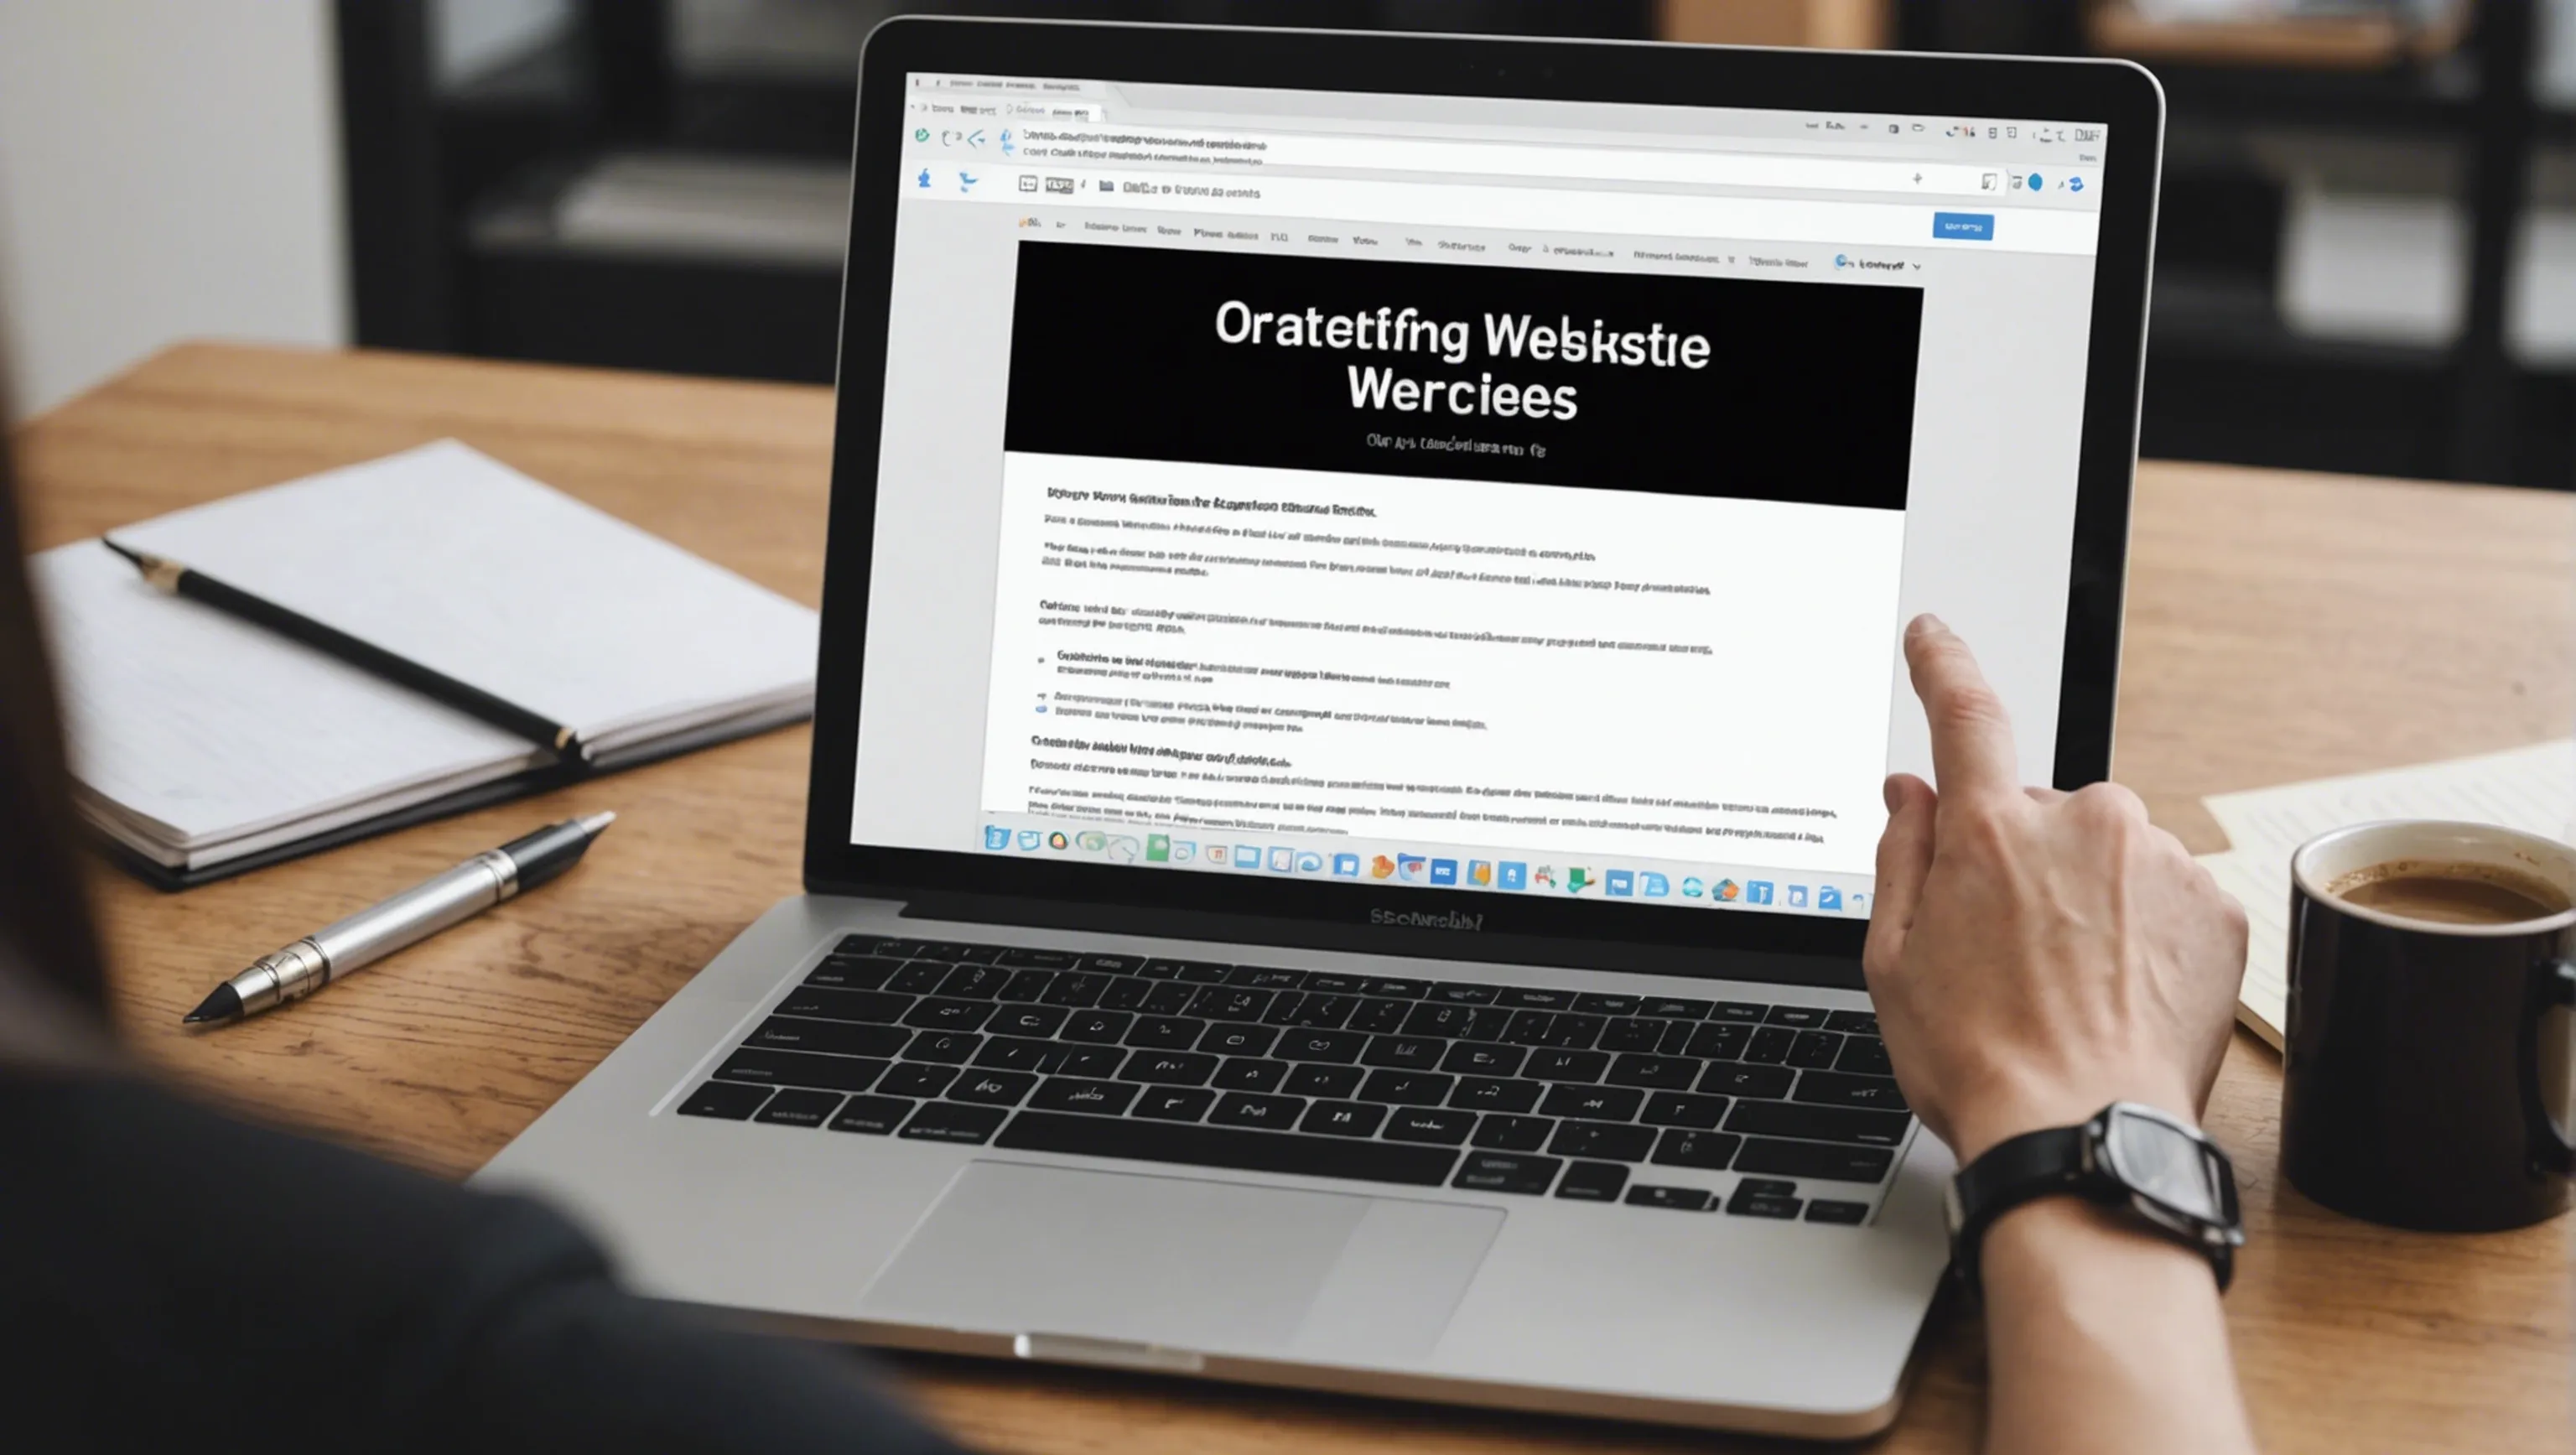 Identifying Relevant Websites for Outreach